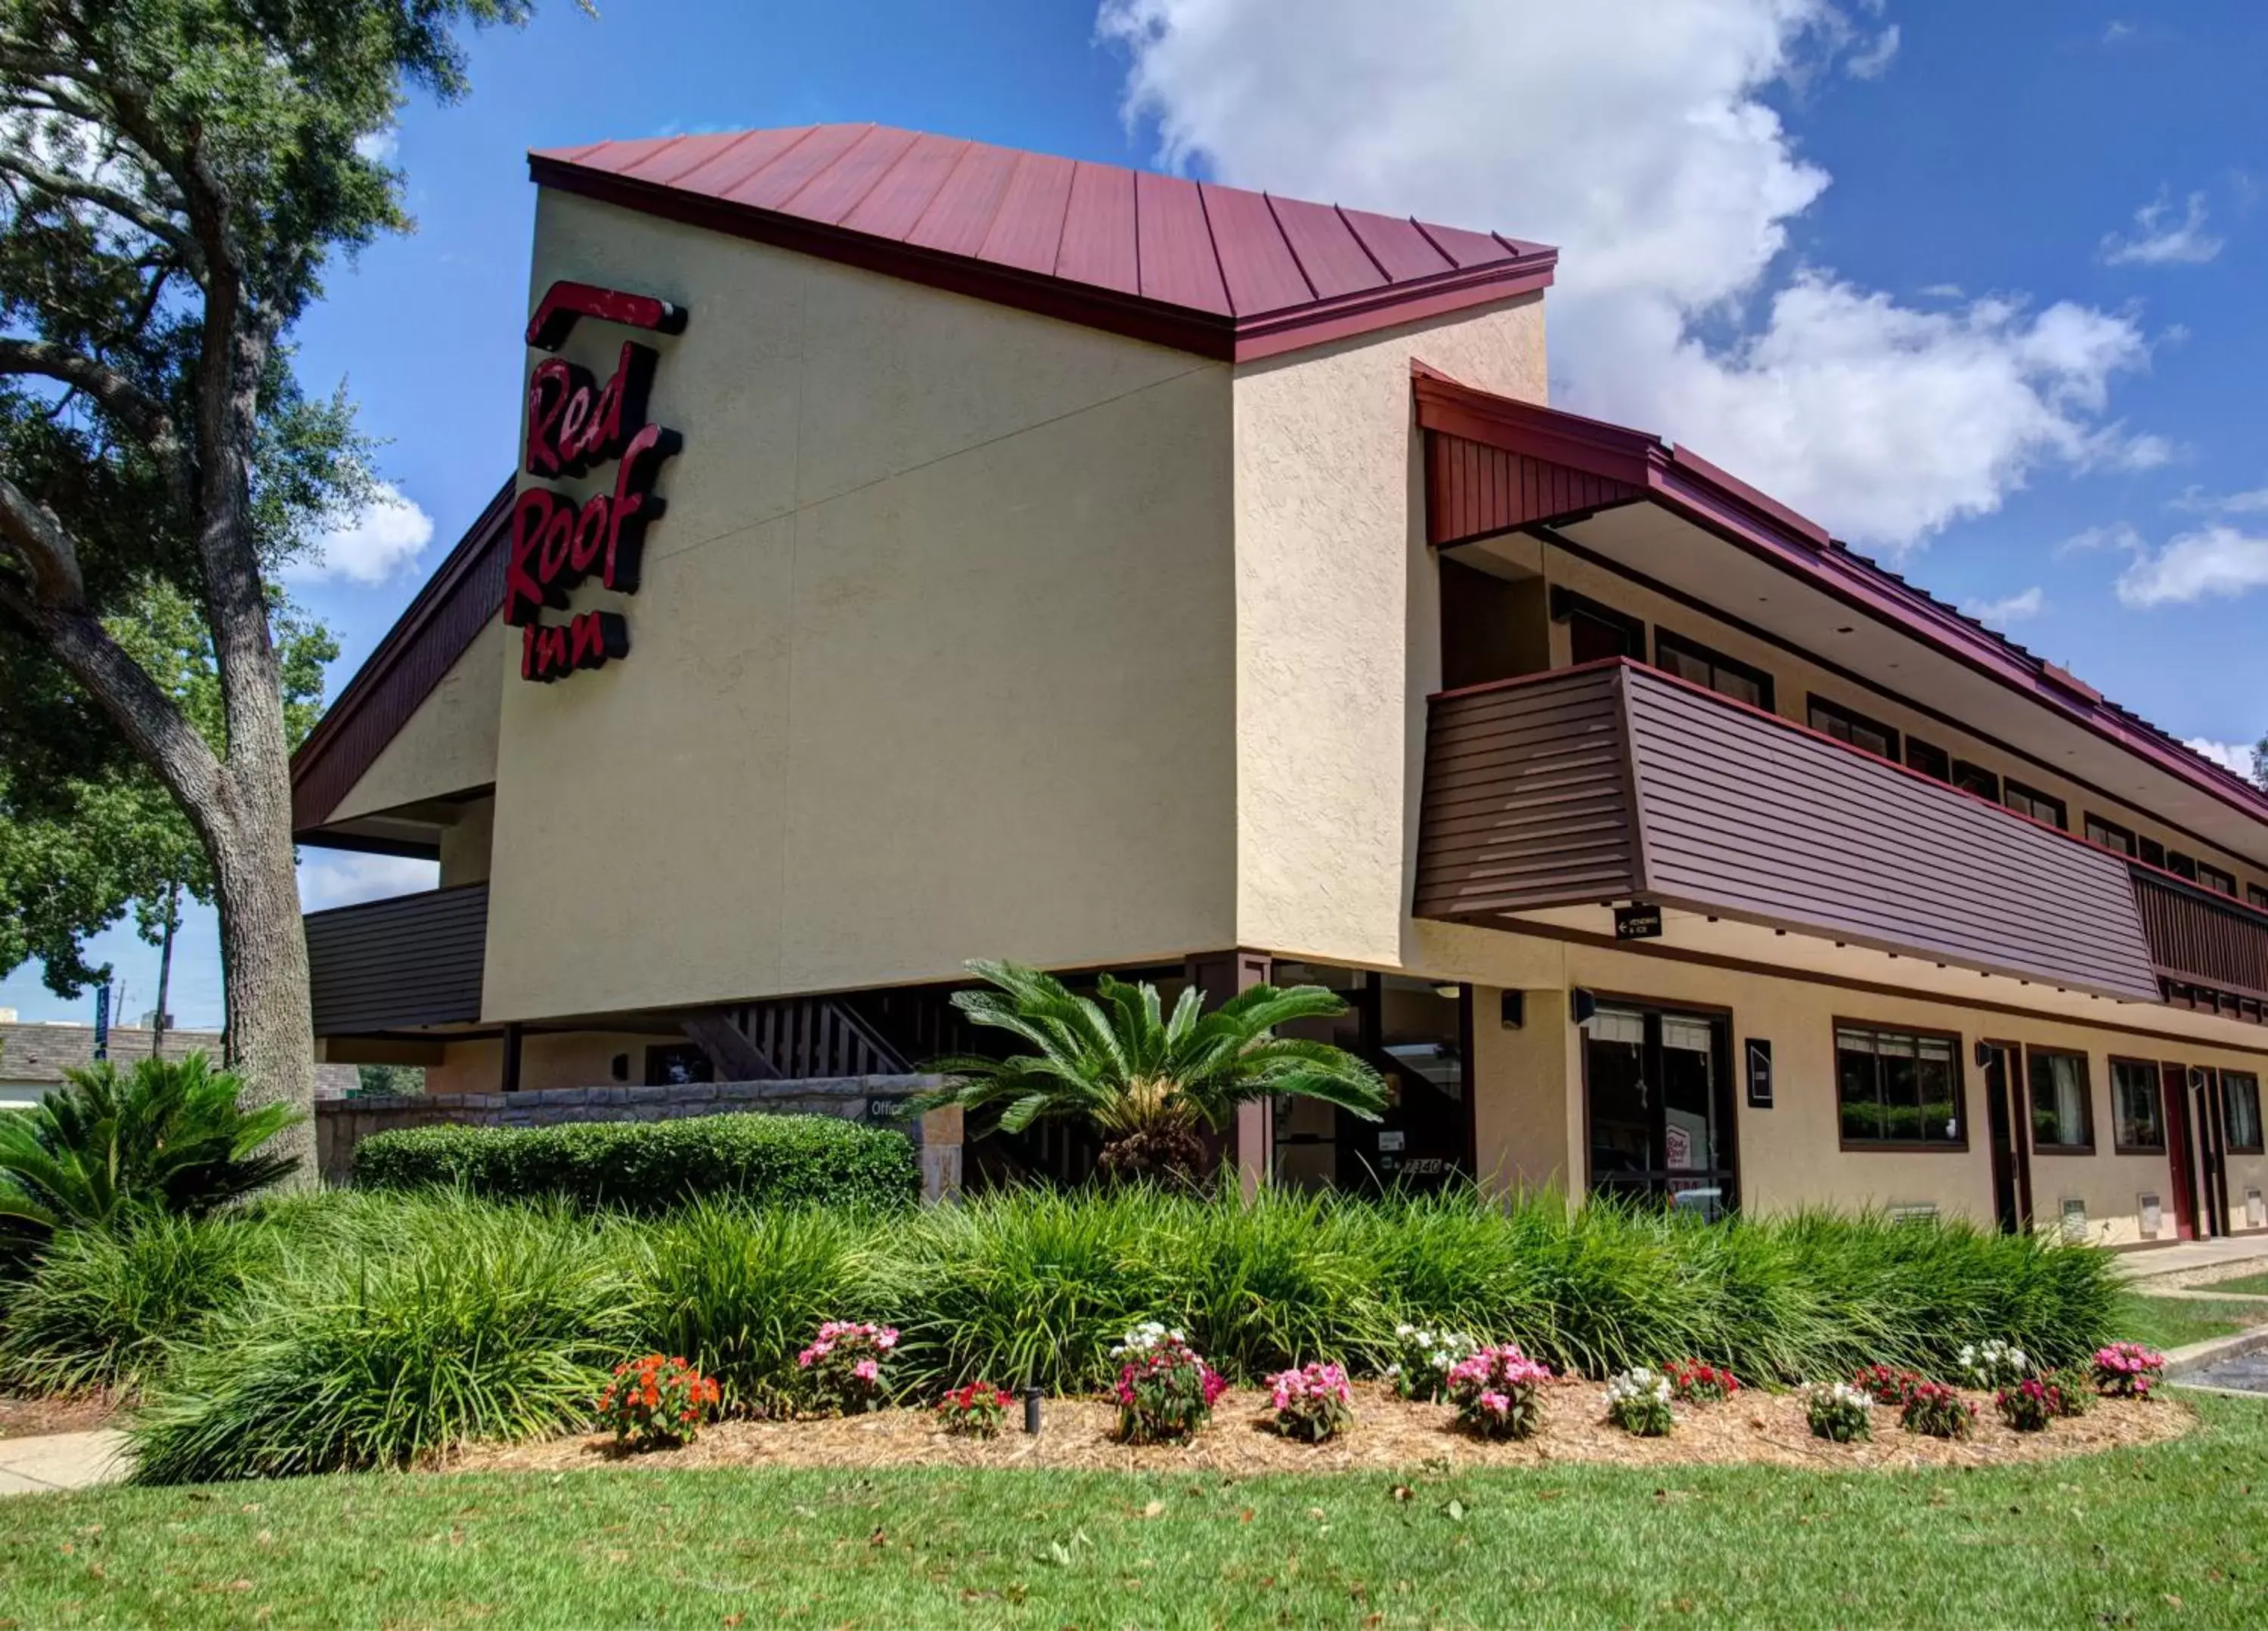 Property Building in Red Roof Inn Pensacola - I-10 at Davis Highway